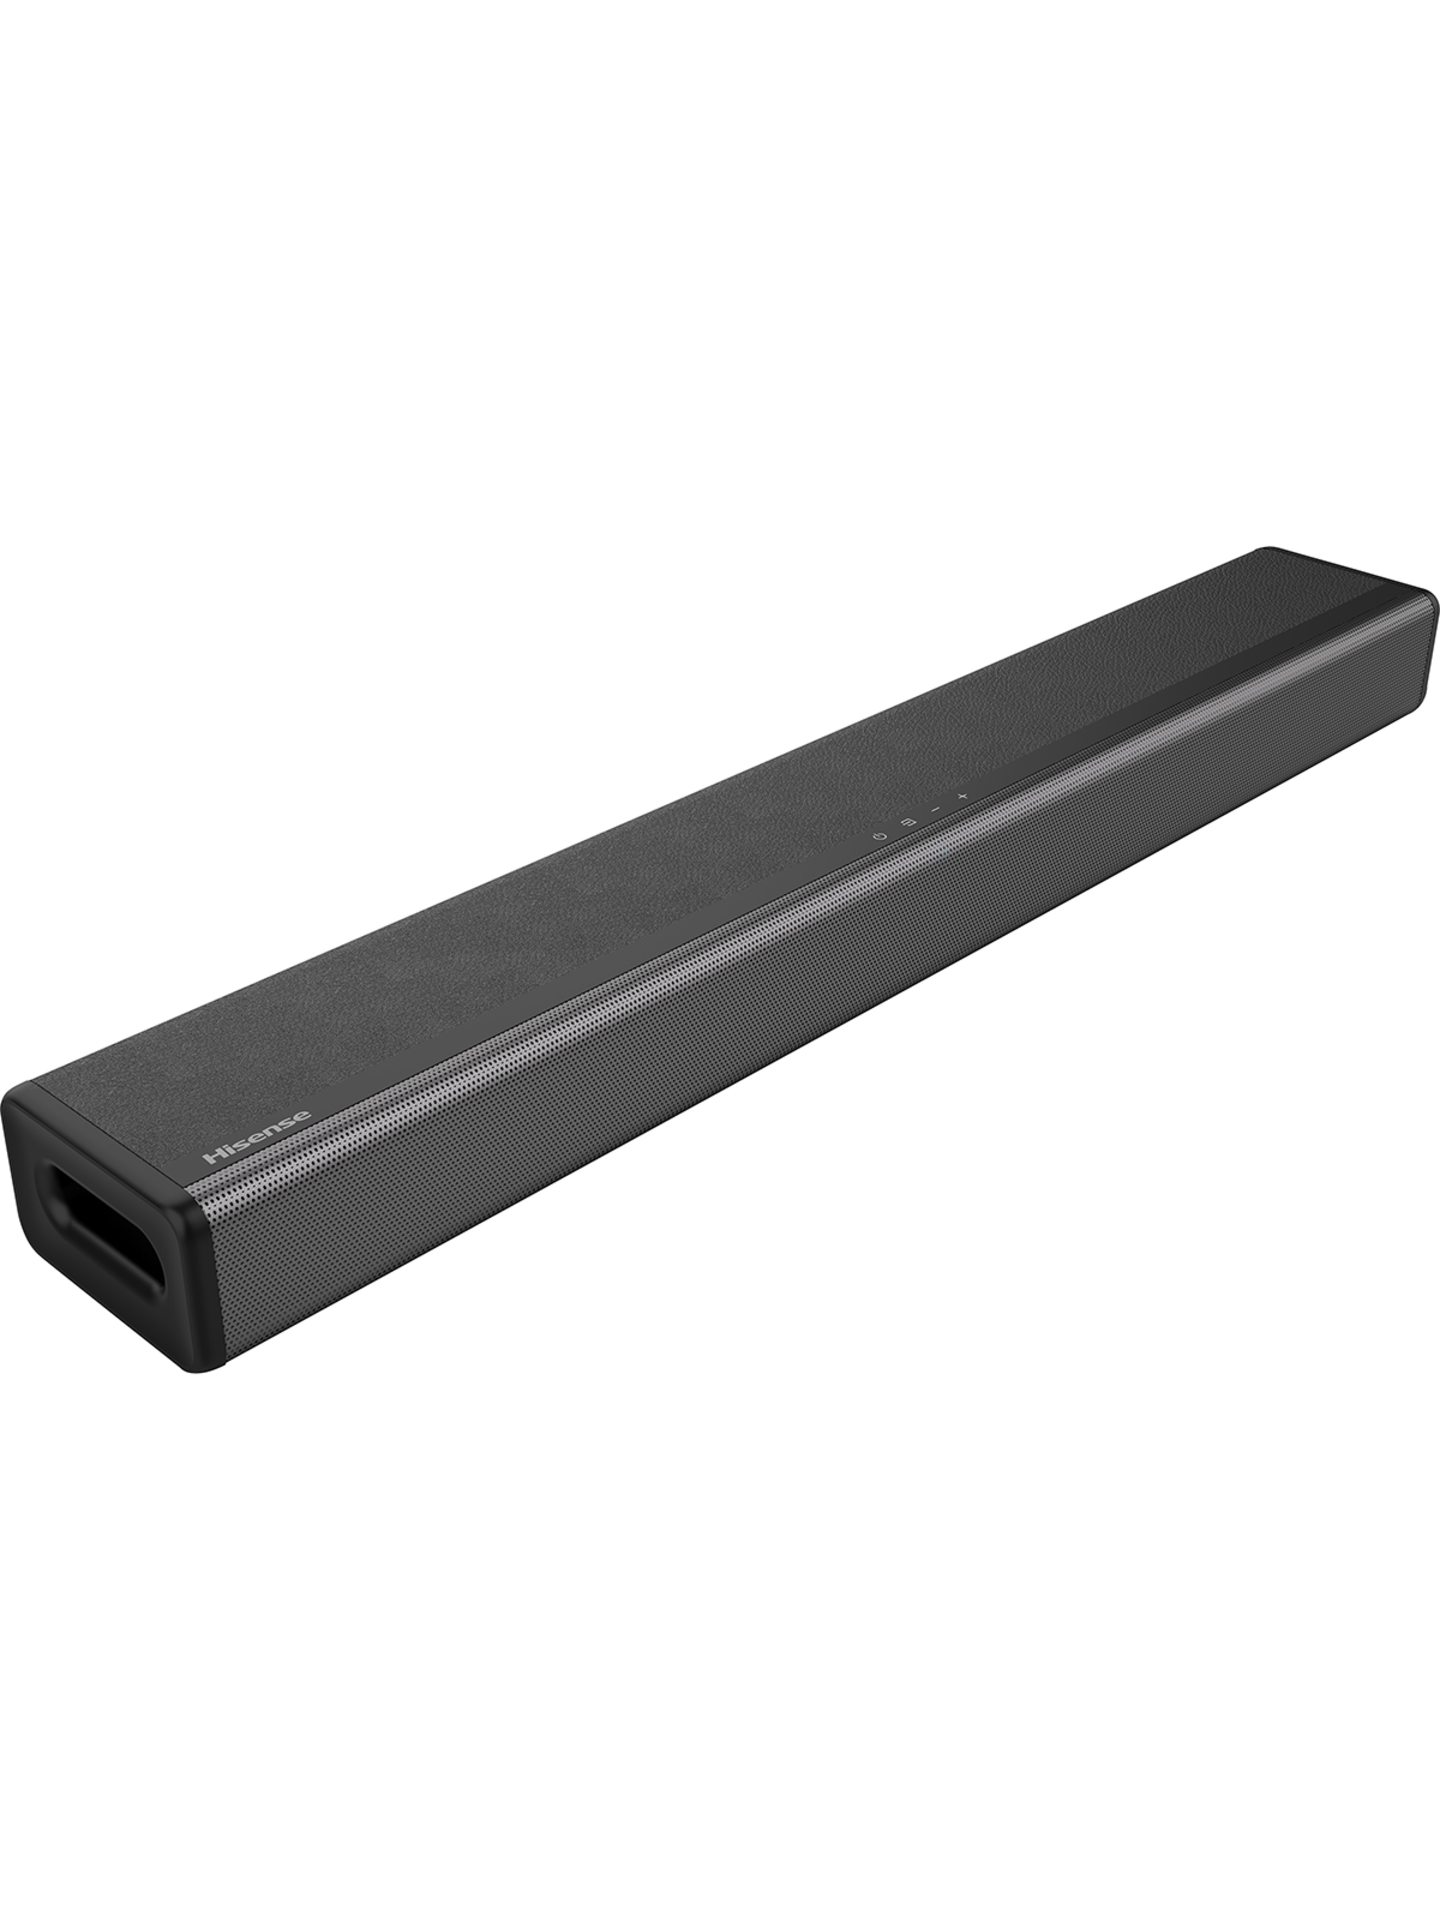 HISENSE HS214 ALL-IN-ONE SOUNDBAR WITH SUB AND BLUETOOTH IN SILVER - RRP £129 - Image 2 of 8